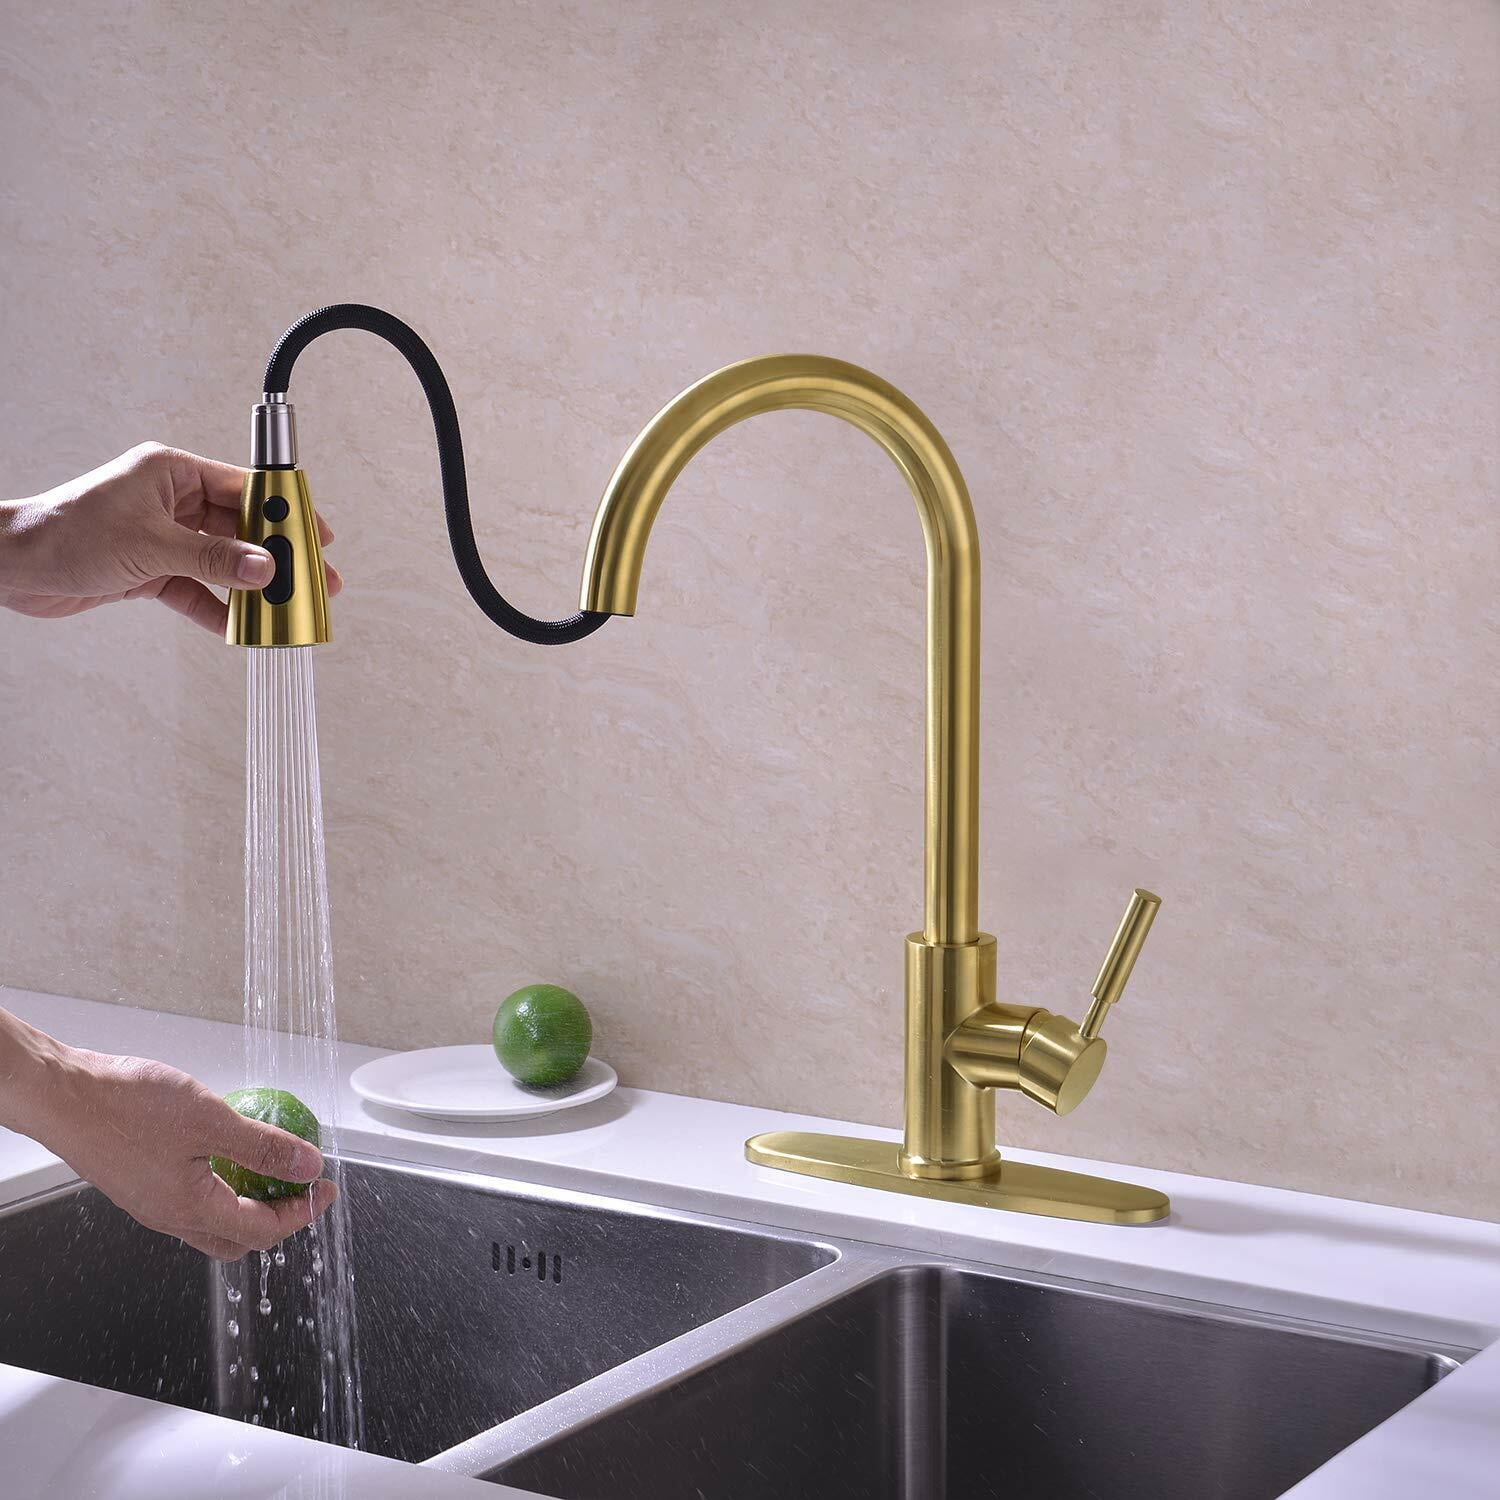 XOXO luxury kitchen faucet head quality copper brush nickel exports  atomization pull out kitchen sink faucets Mixer tap 83034